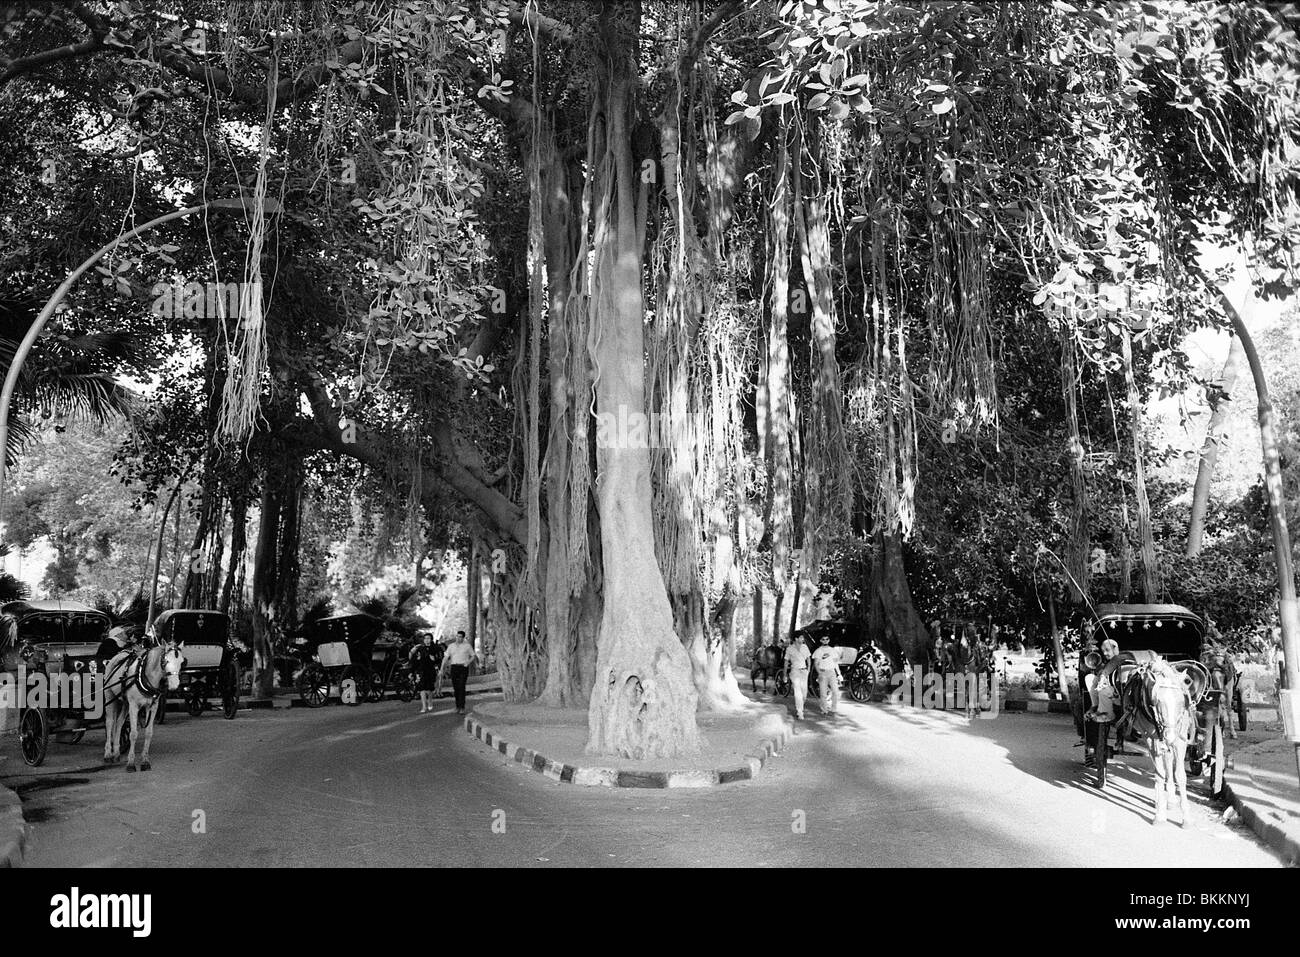 Caleche's lined up under a giant rubber tree on the Island of Gezira in Cairo, Egypt Stock Photo